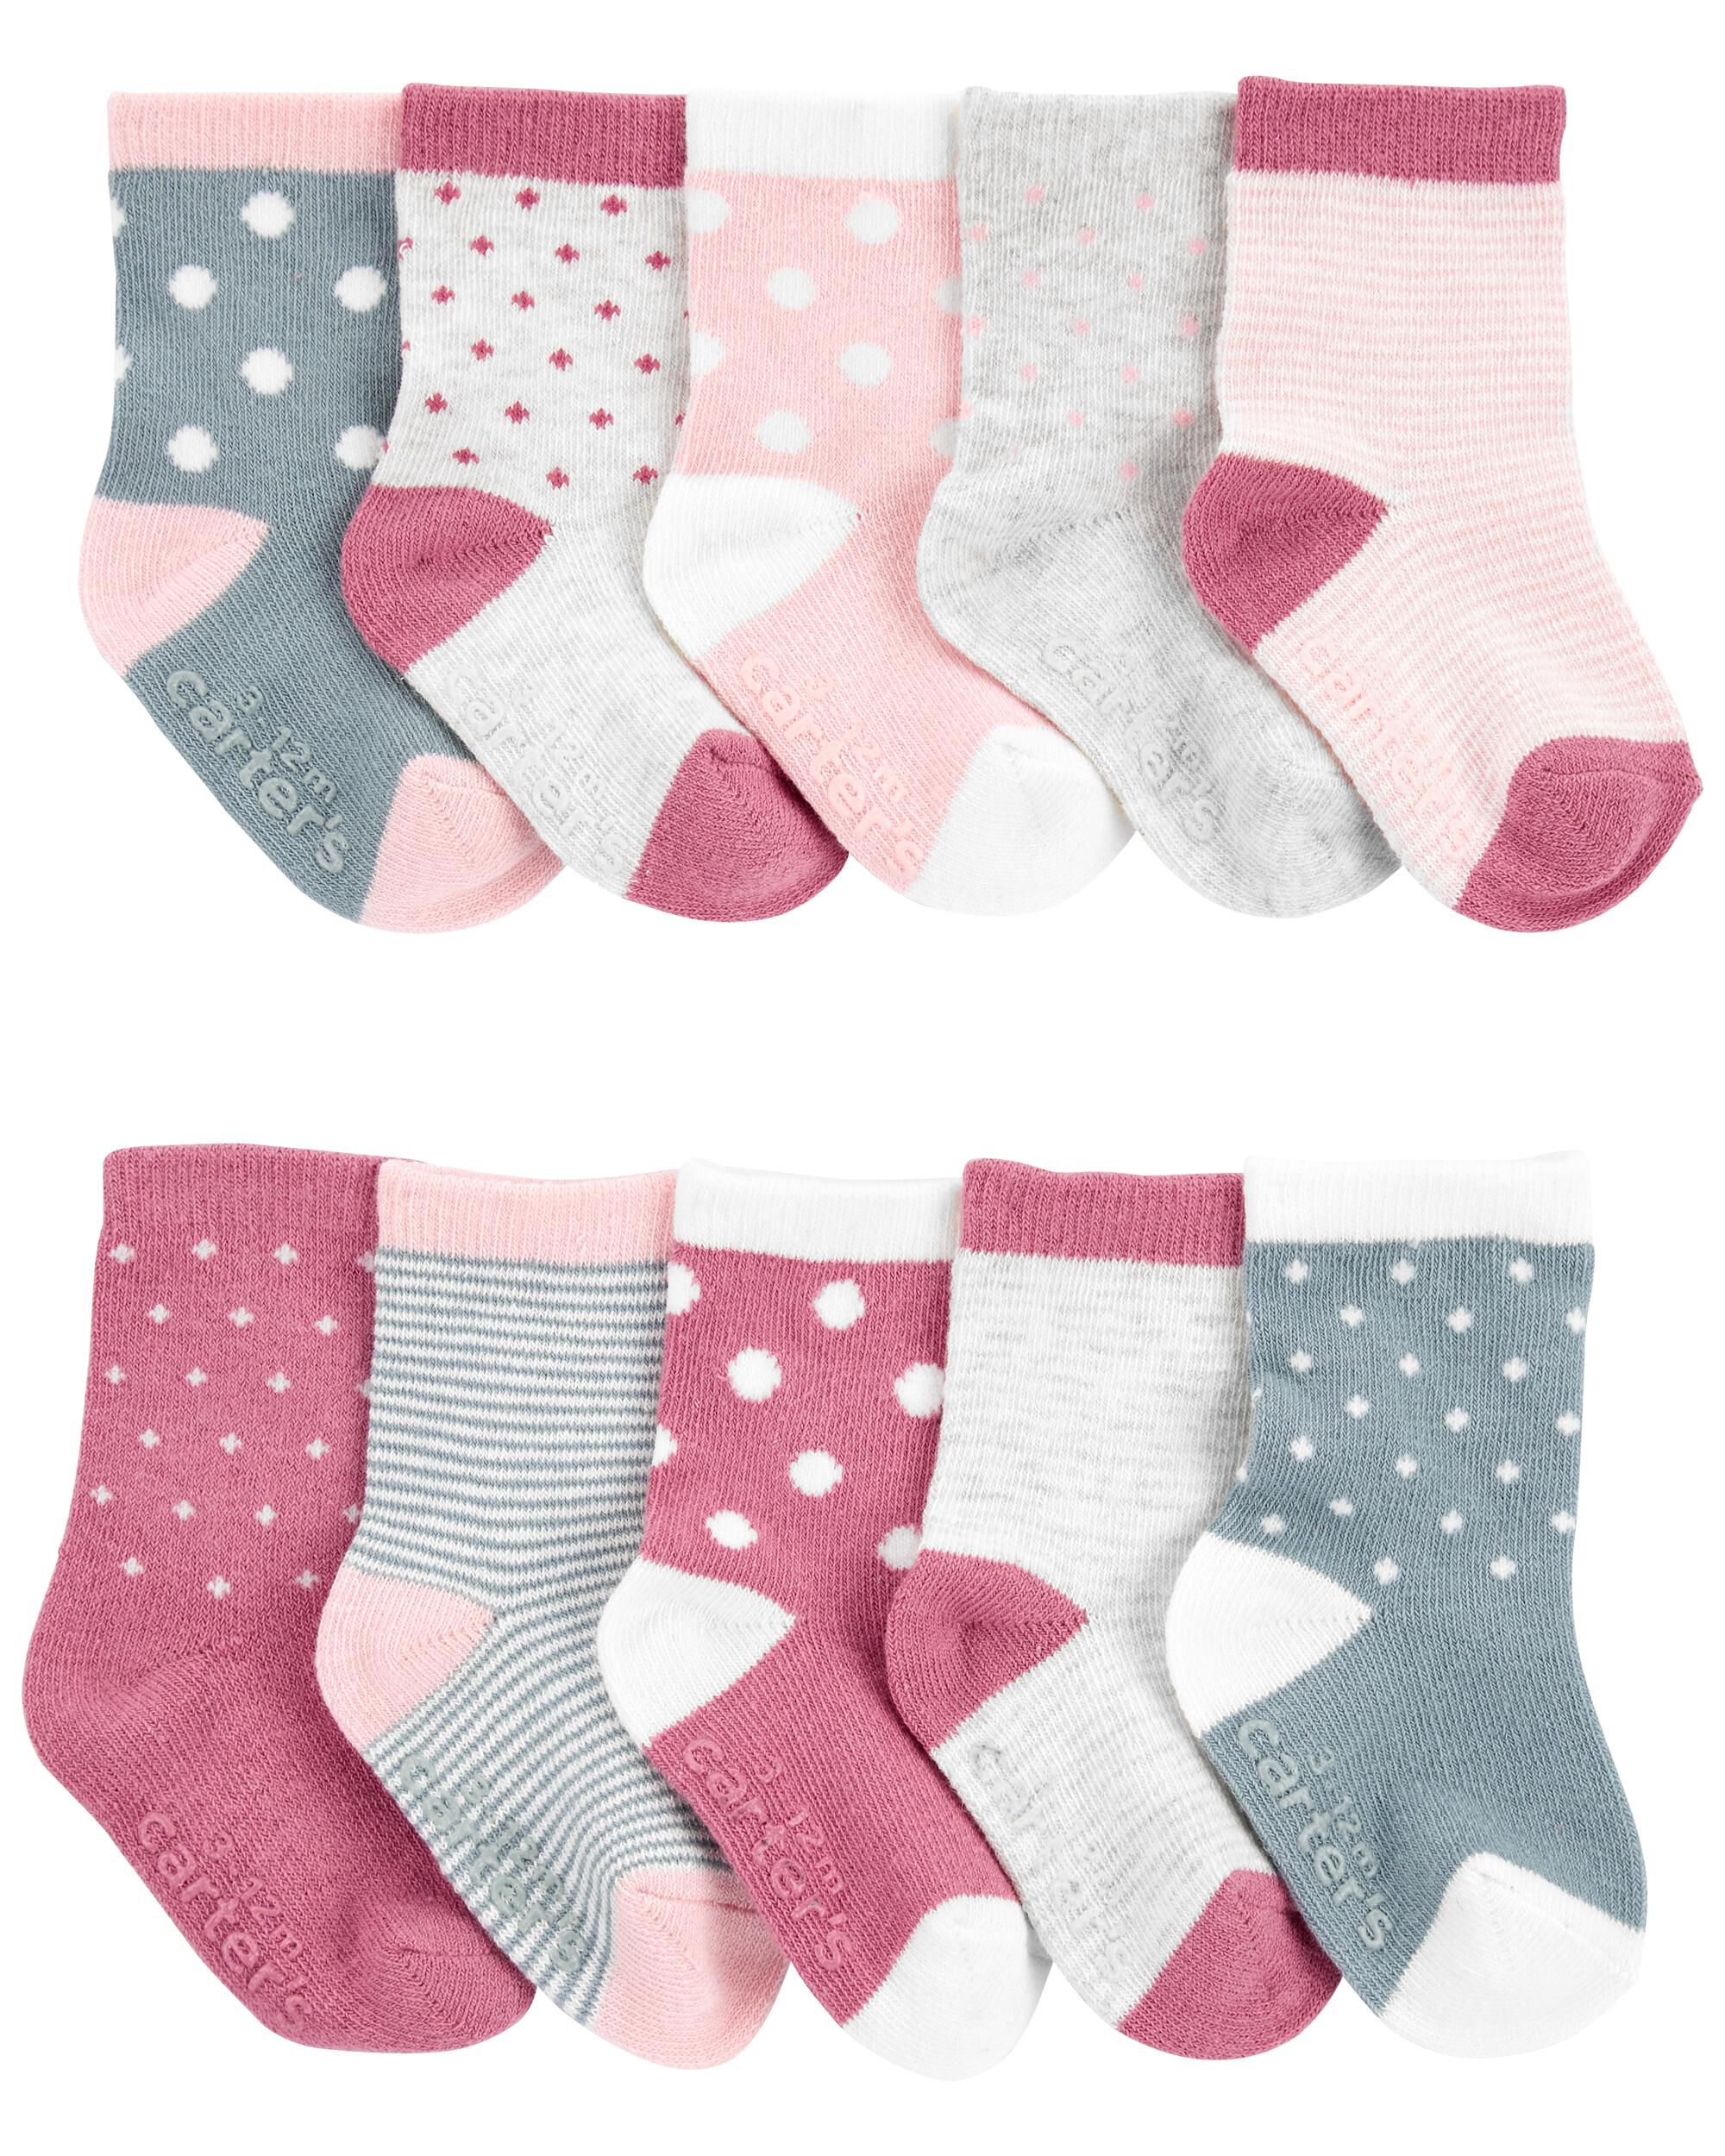 MCL Carter's Girls' 3-Pack Hearts Knee High Socks Red,white,blue,pink Sz 2T-4T 